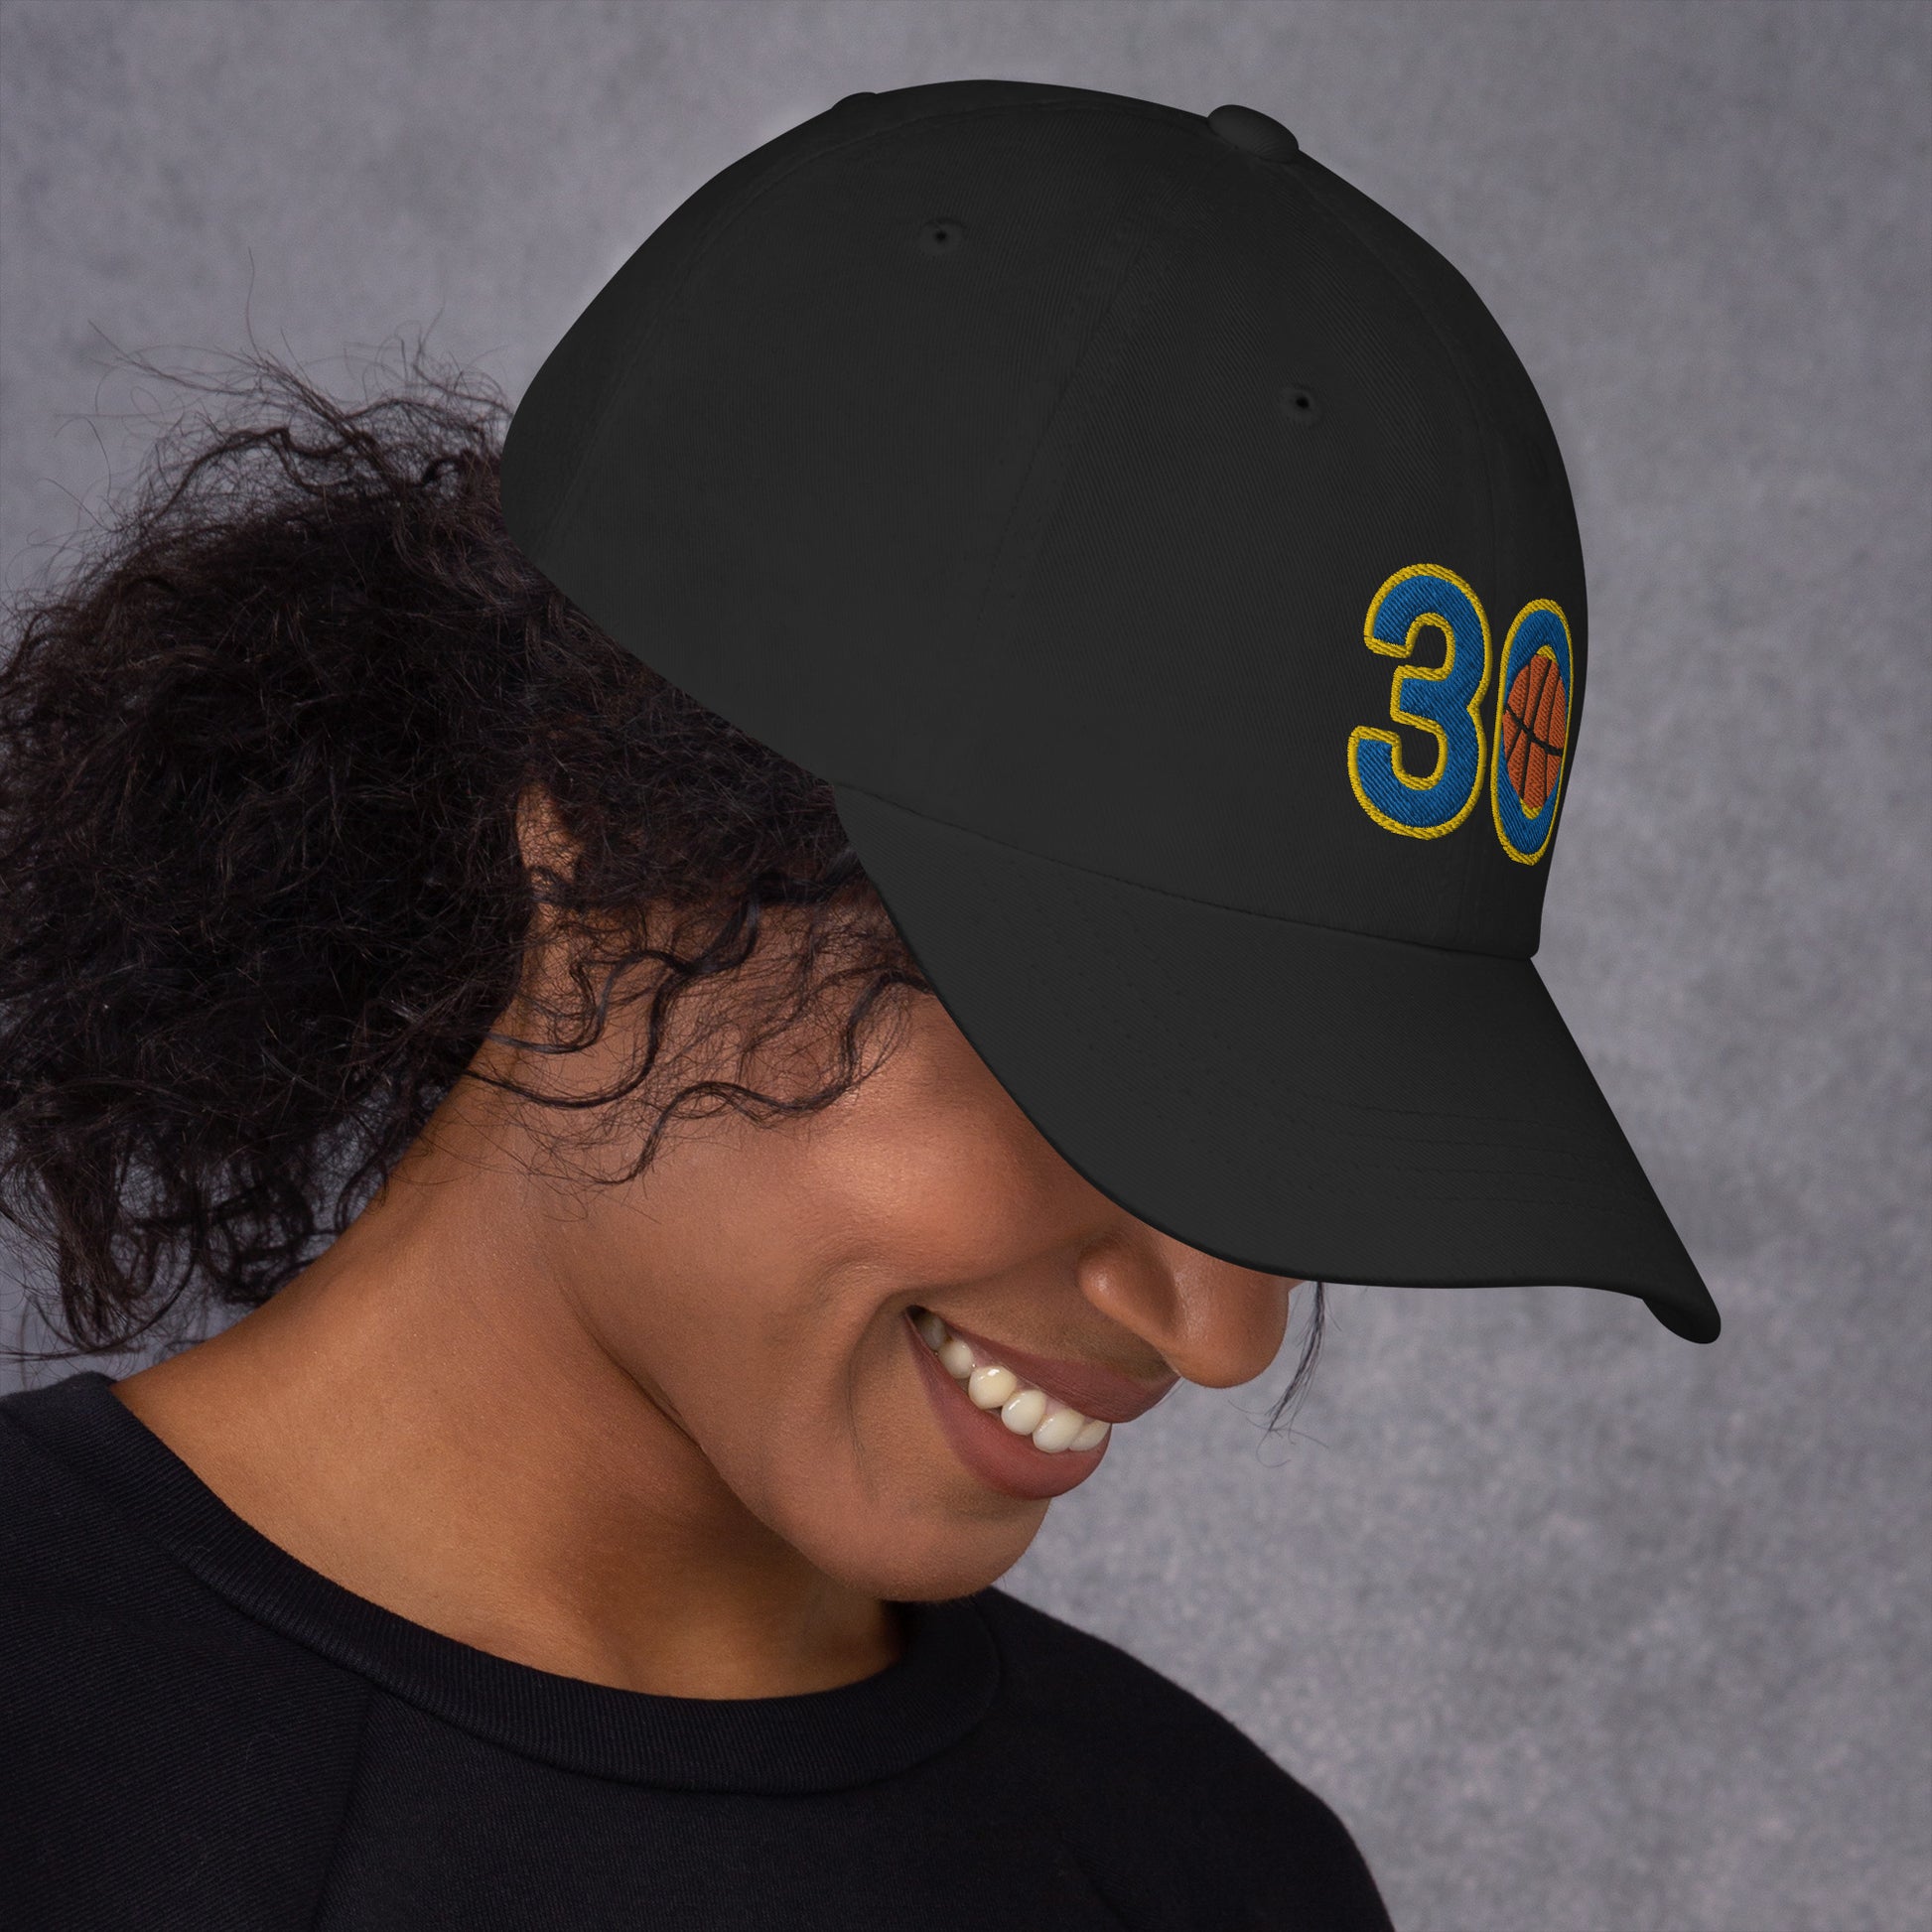 30 Hat / 30 Basketball Hat / 30 Steph Hat / Curry 30 Dad Hat